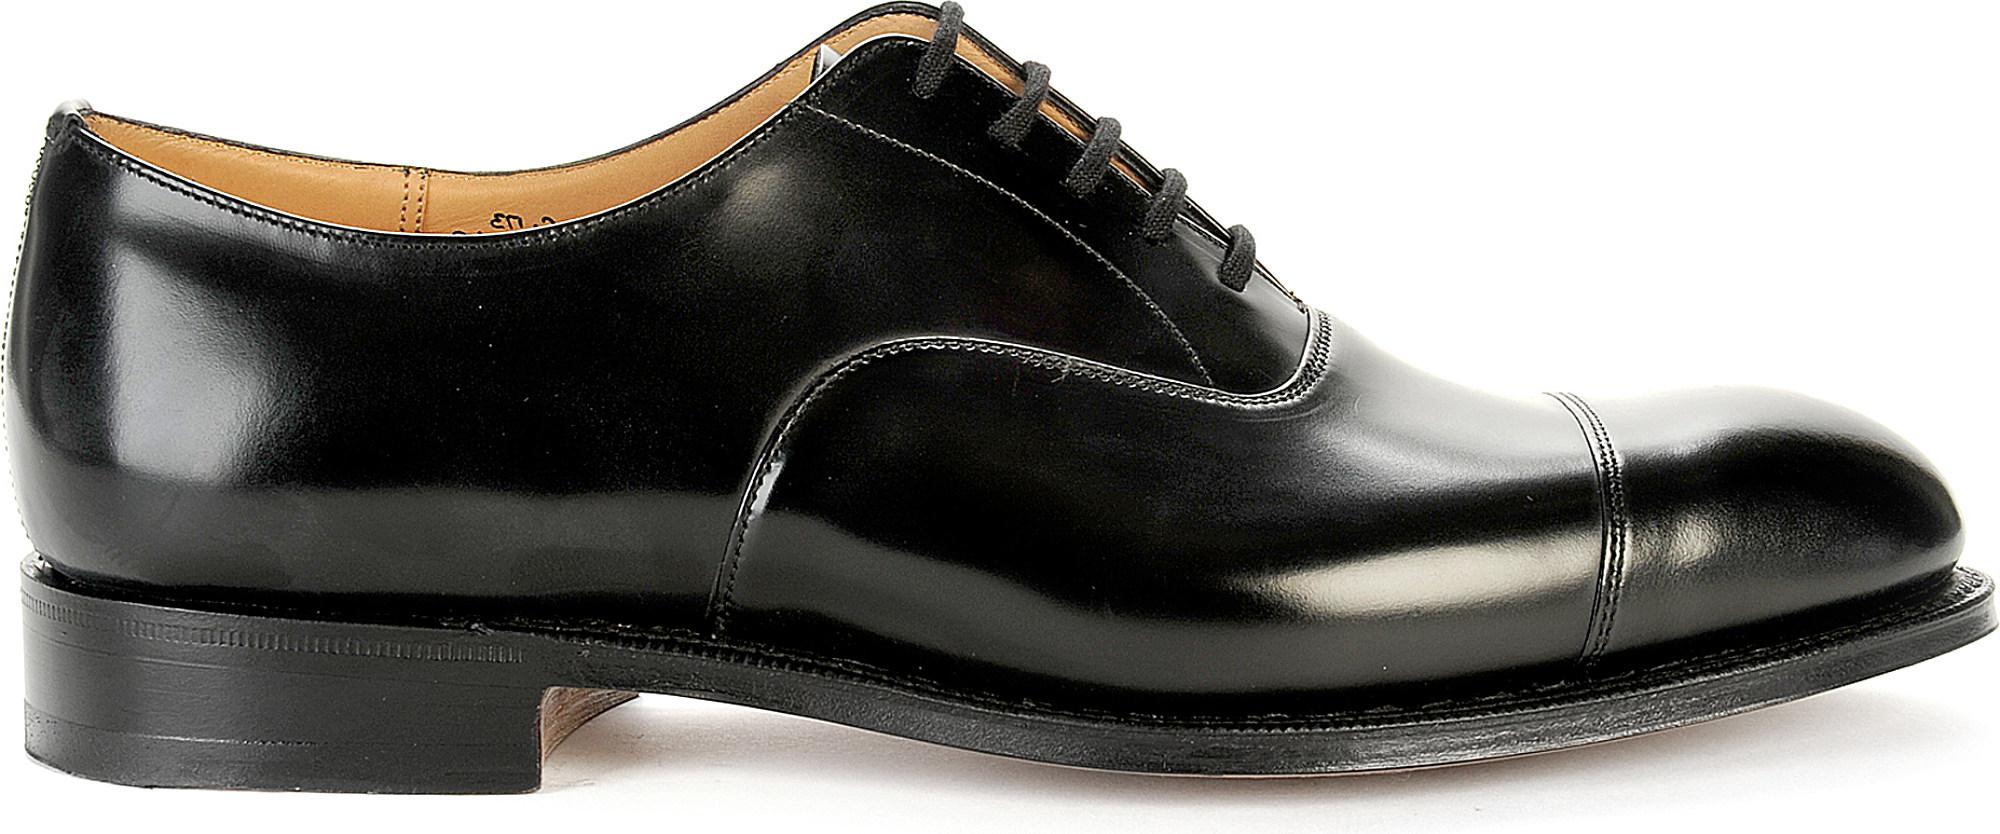 Church's Leather Consul G Oxford Shoes in Black for Men - Lyst